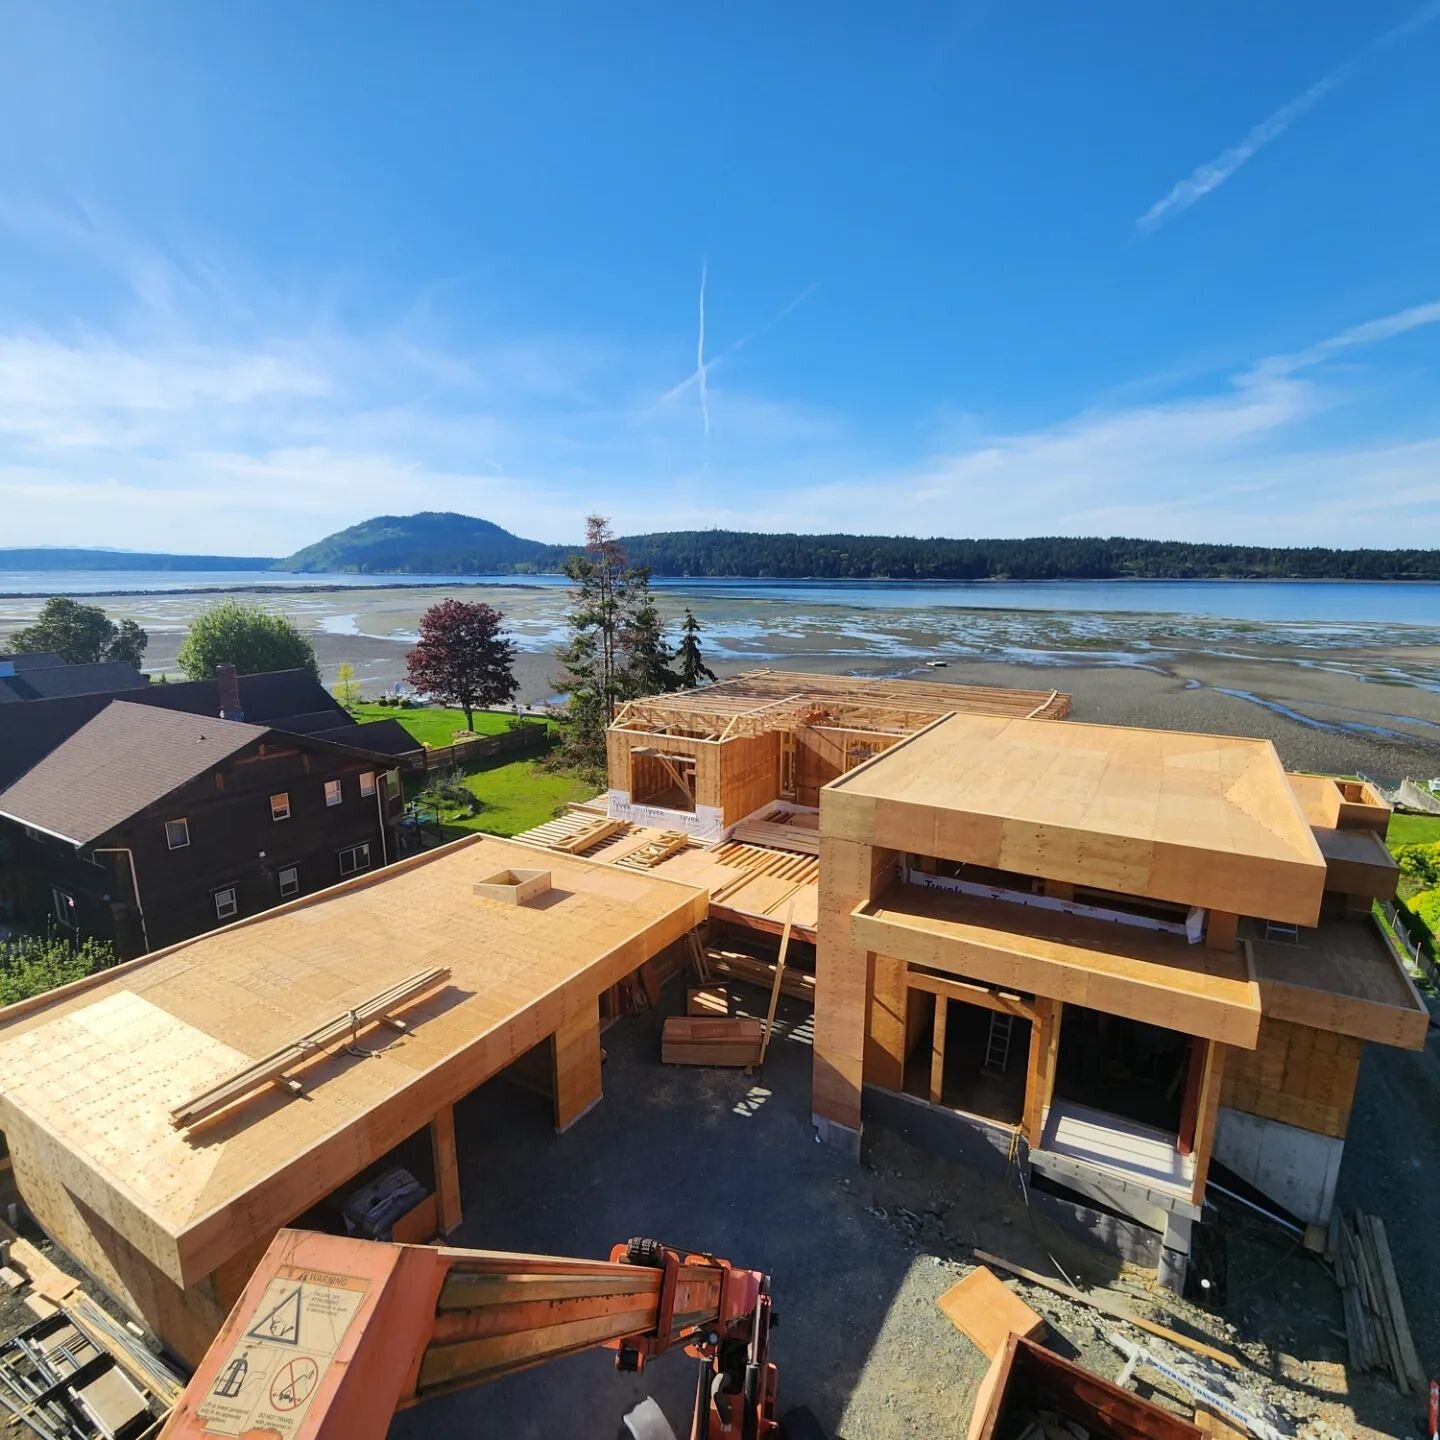 This monster sure is taking shape now. Last section of roof to button up and we're onto decks and some backframing.
Loving the weather lately! 

#carpenter #framersareadyingbreed #contractor #builder #customhomes #luxuryhomes #vancouverisland #constr